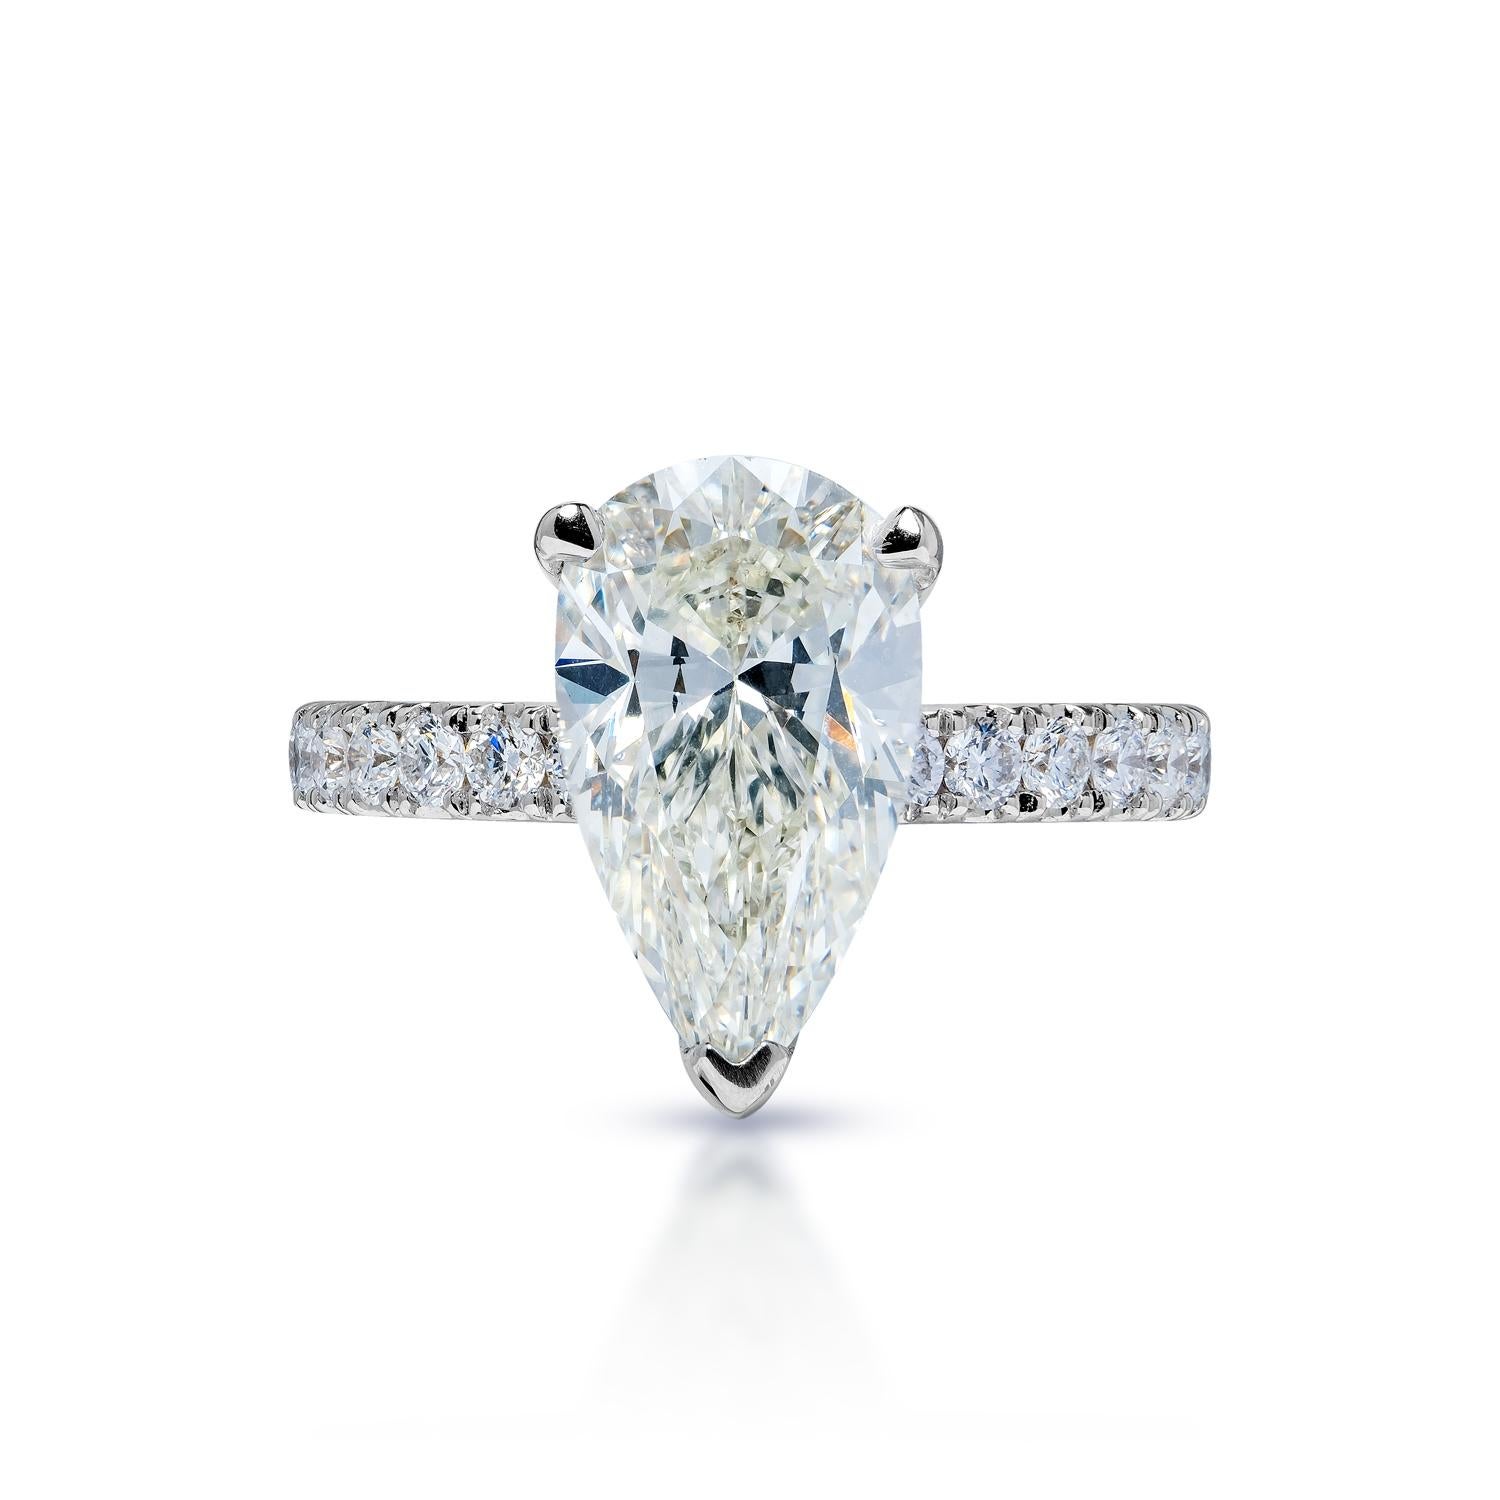 EGL Certified


Center Earth Mined Diamond:
Carat Weight: 3.11 Carats
Color: G
Clarity: VS1
Style: Pear Shape

Ring:
Carat Weight: 0.68 Carats
Style: Round Brilliant Cut
Metal: 18 Karat White Gold
Setting: Sidestone
Size: Can be adjusted to any